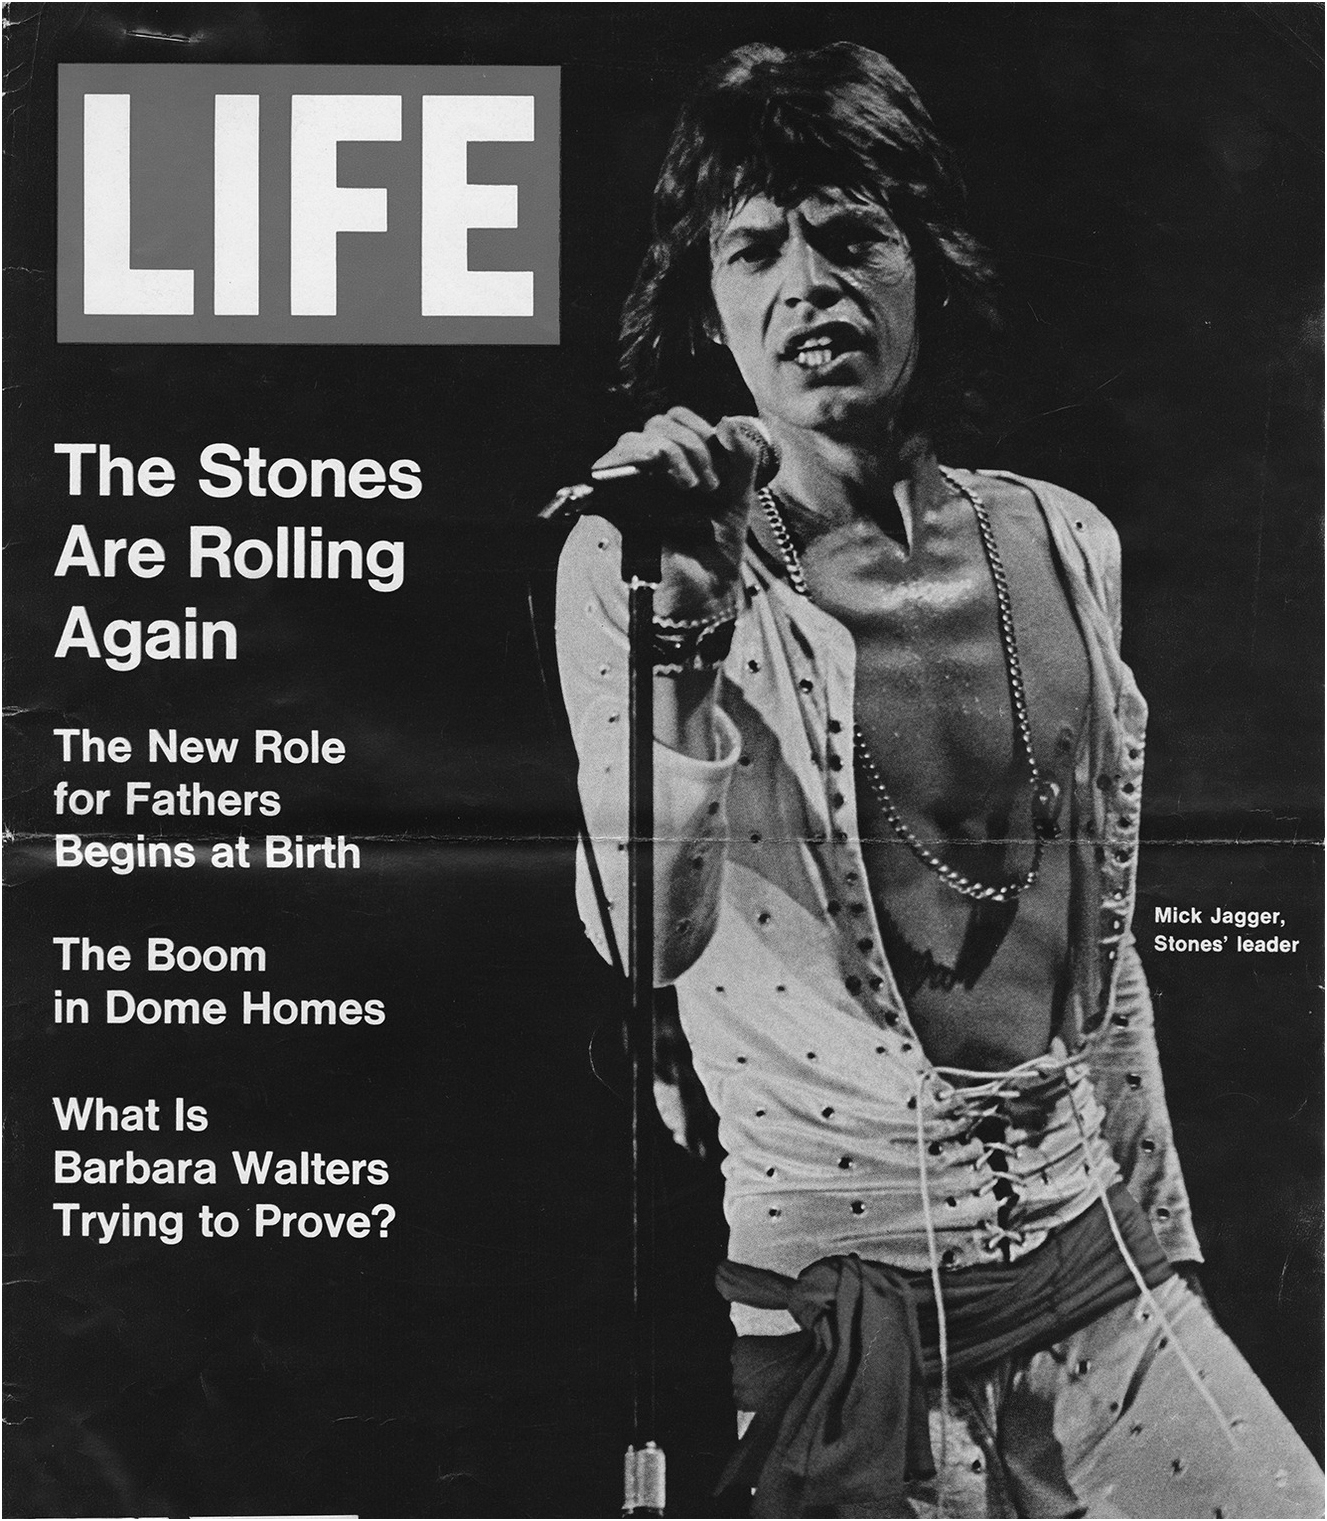 Rolling Stones Beast of Burden Meaning - Keith Richards Reveals What the  Song Lyrics Mean